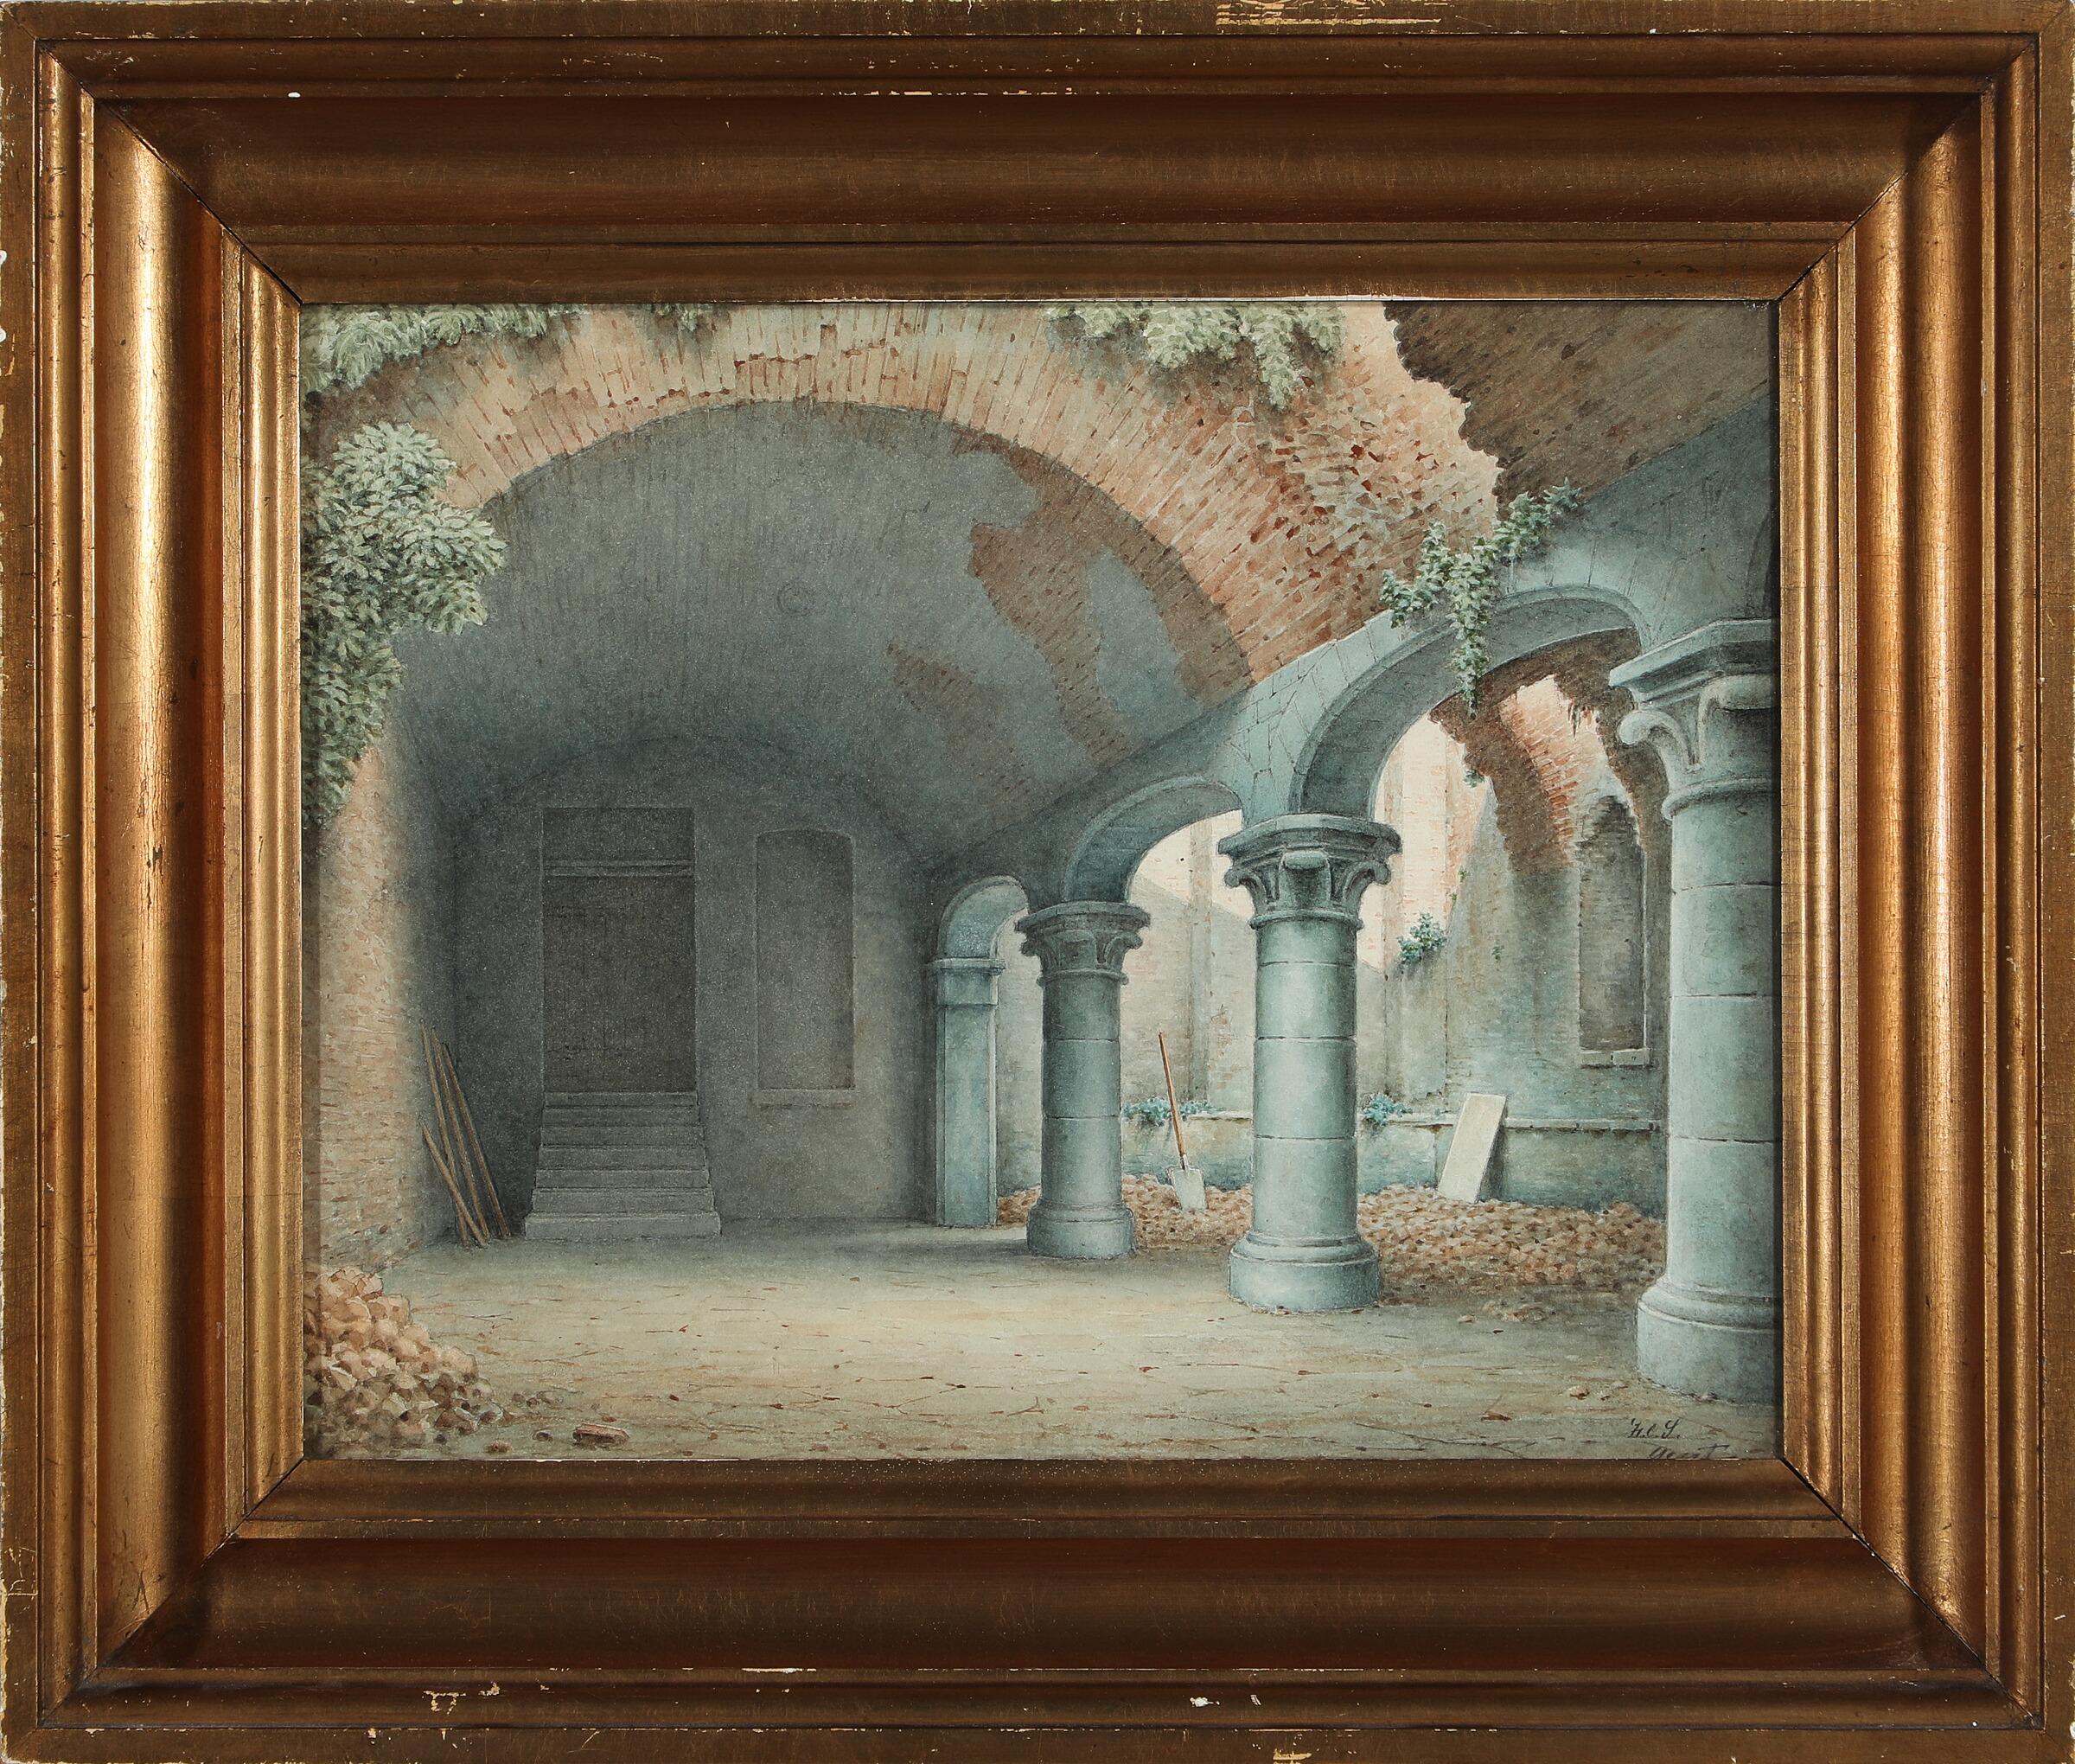 Ruins of a monastery courtyard. Signed and dated H. C. S. 1865. Harald Conrad Stilling (1815-1891) Watercolor on paper.

Stilling was a Danish architect who was active in Copenhagen and made travels to Italy, Greece, and the Orient. Stilling